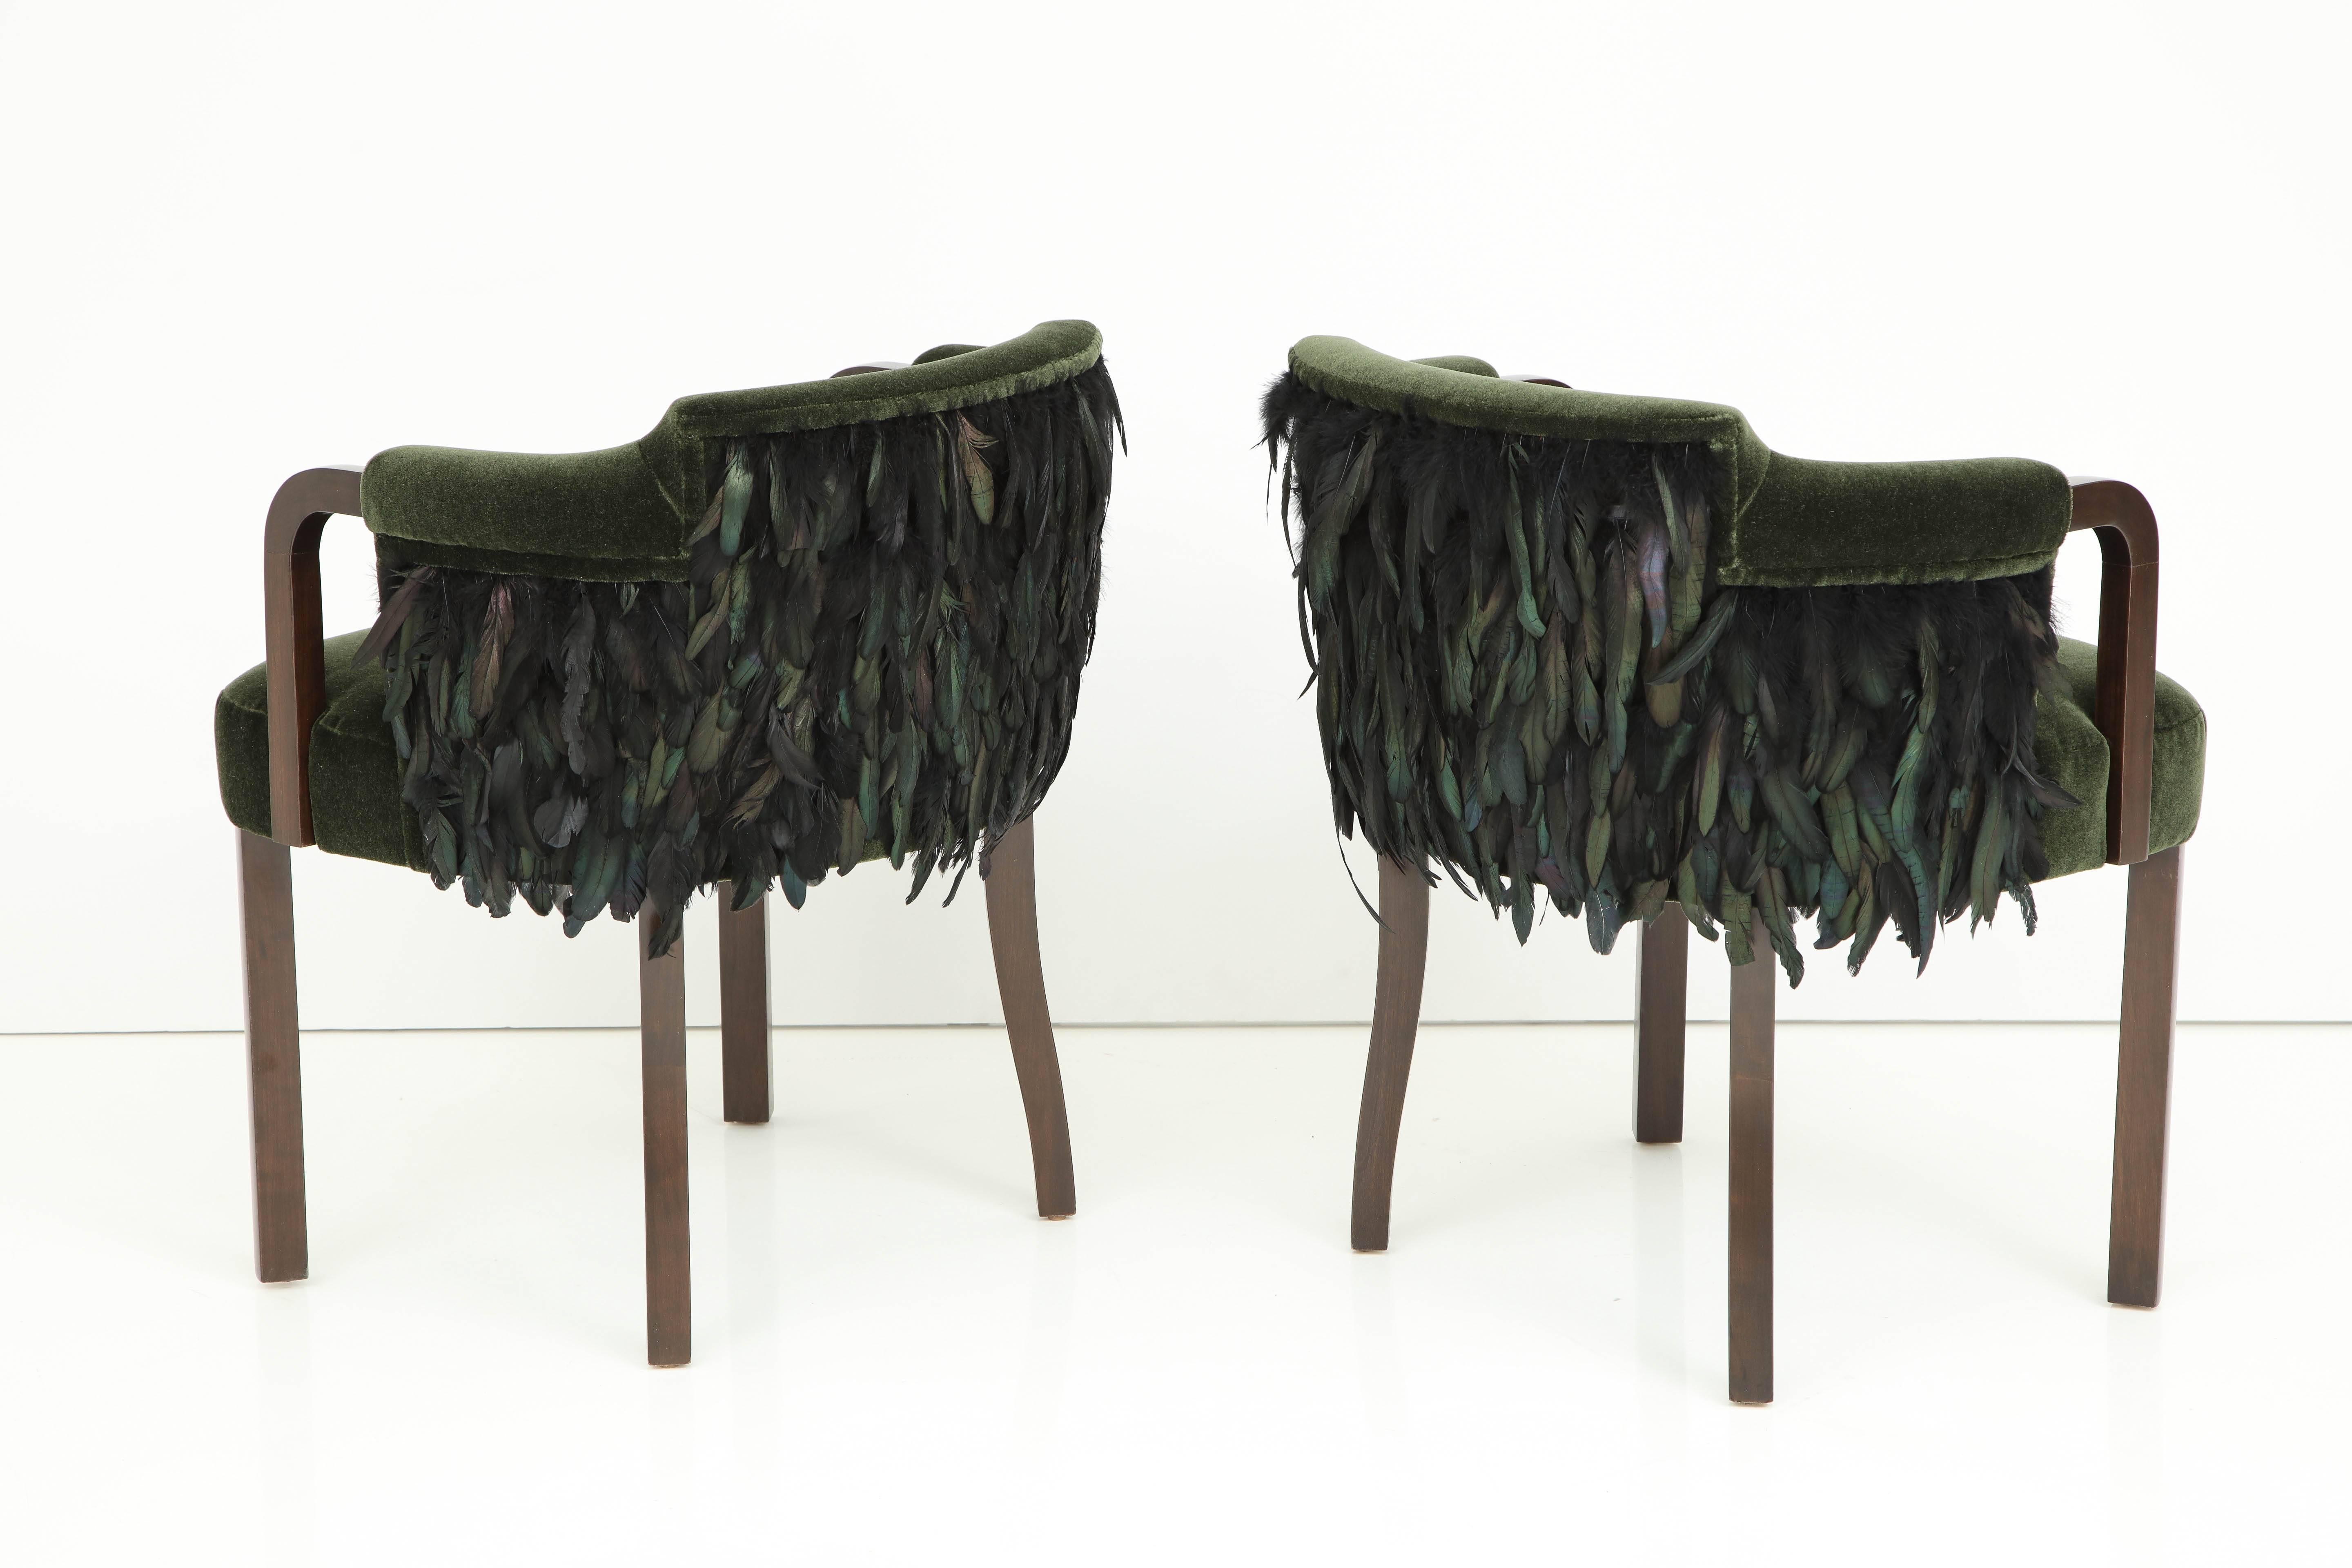 Fantastic pair of chairs with medium coffee brown stained Walnut frames upholstered in a heavy Dutch forest green Mohair with black/green iridescent sheen feathered back detail. Mint restored/ new upholstery/padding.

Arm height is 27.25